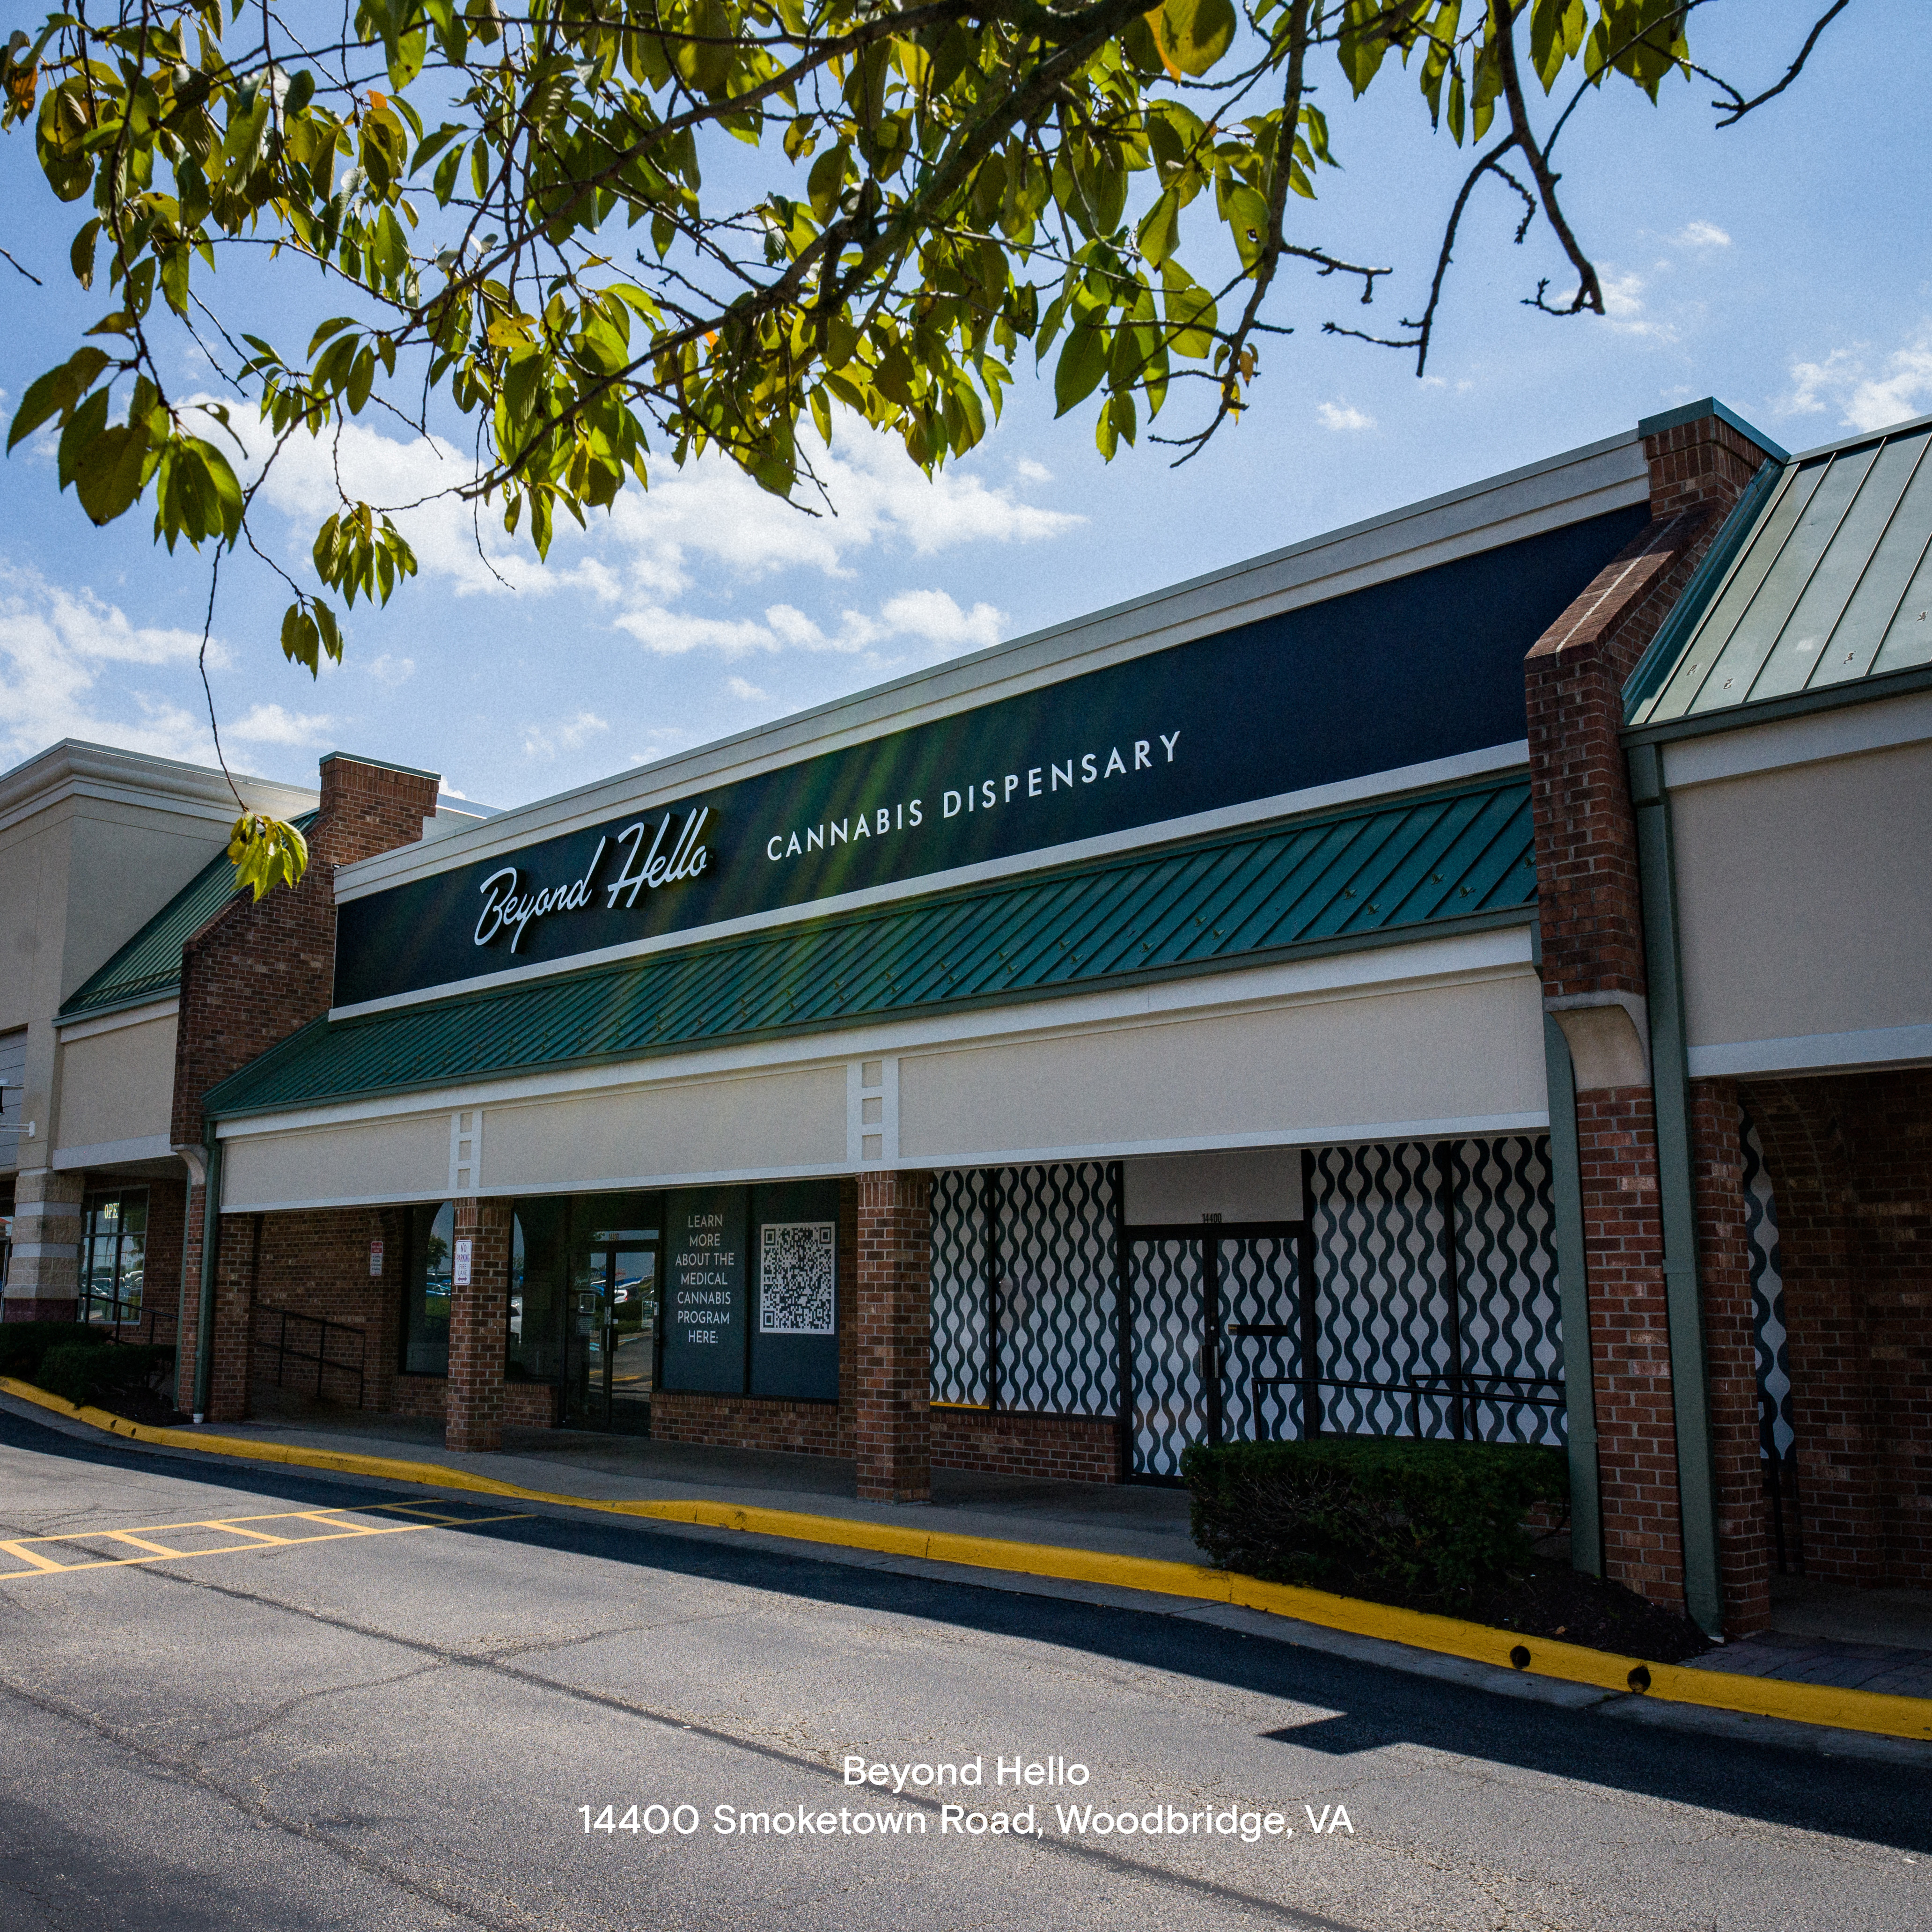 Jushi Holdings Inc., a vertically integrated, multi-state cannabis operator, announced the opening of its sixth medical cannabis dispensary in Virginia. Beyond Hello™ Woodbridge is located in Prince William Square Shopping Center at 14400 Smoketown Road.